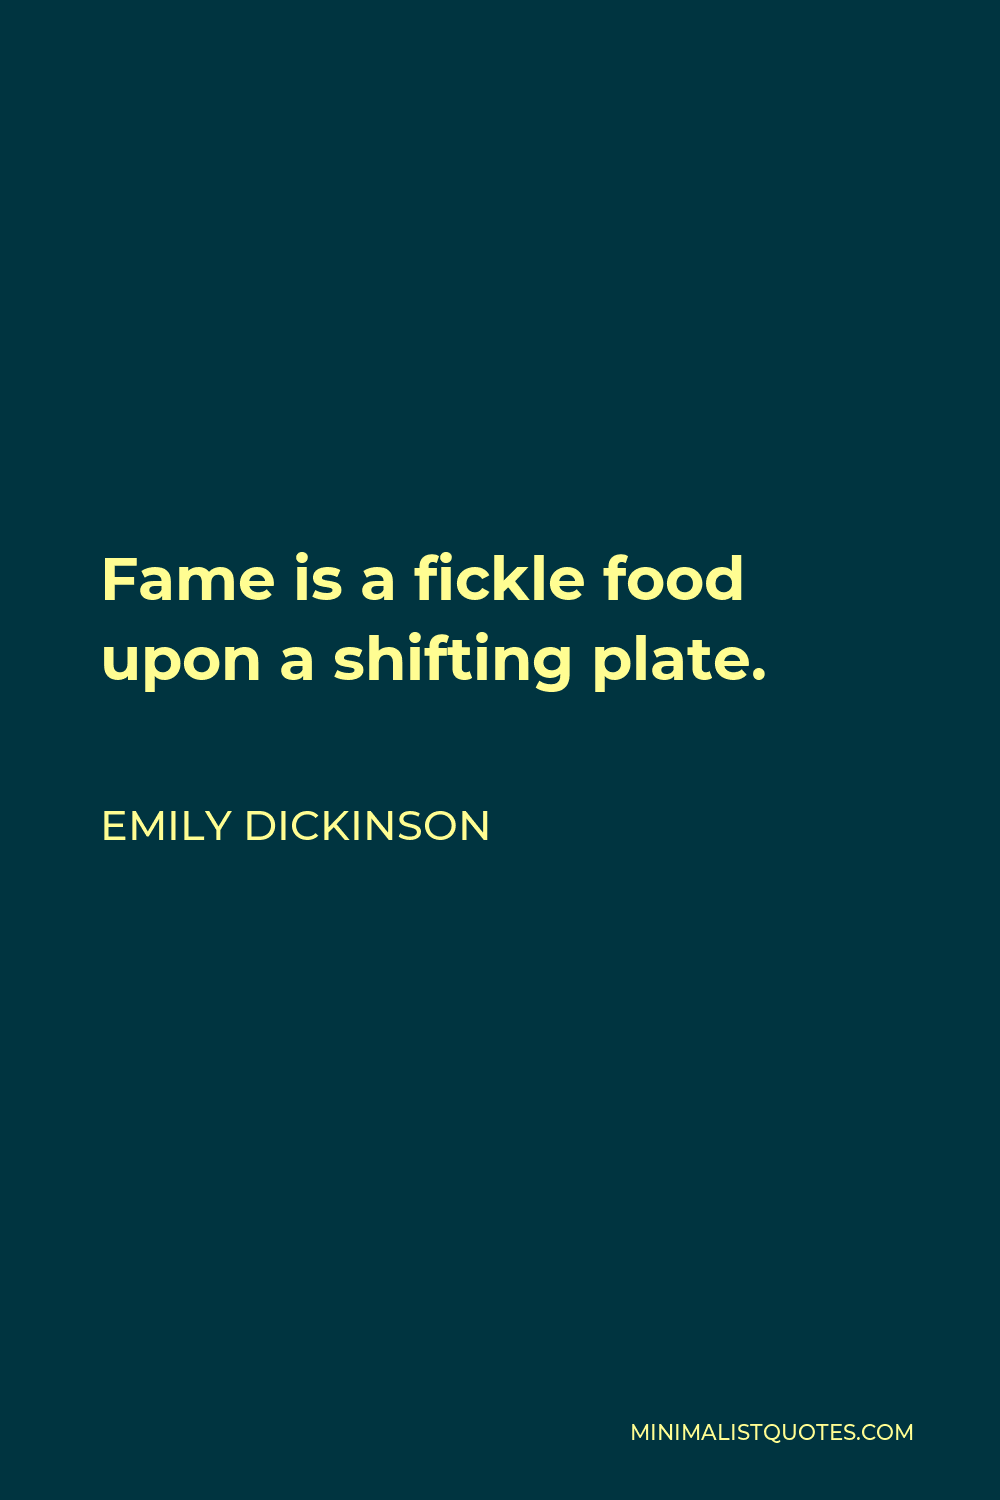 Emily Dickinson Quote - Fame is a fickle food upon a shifting plate.